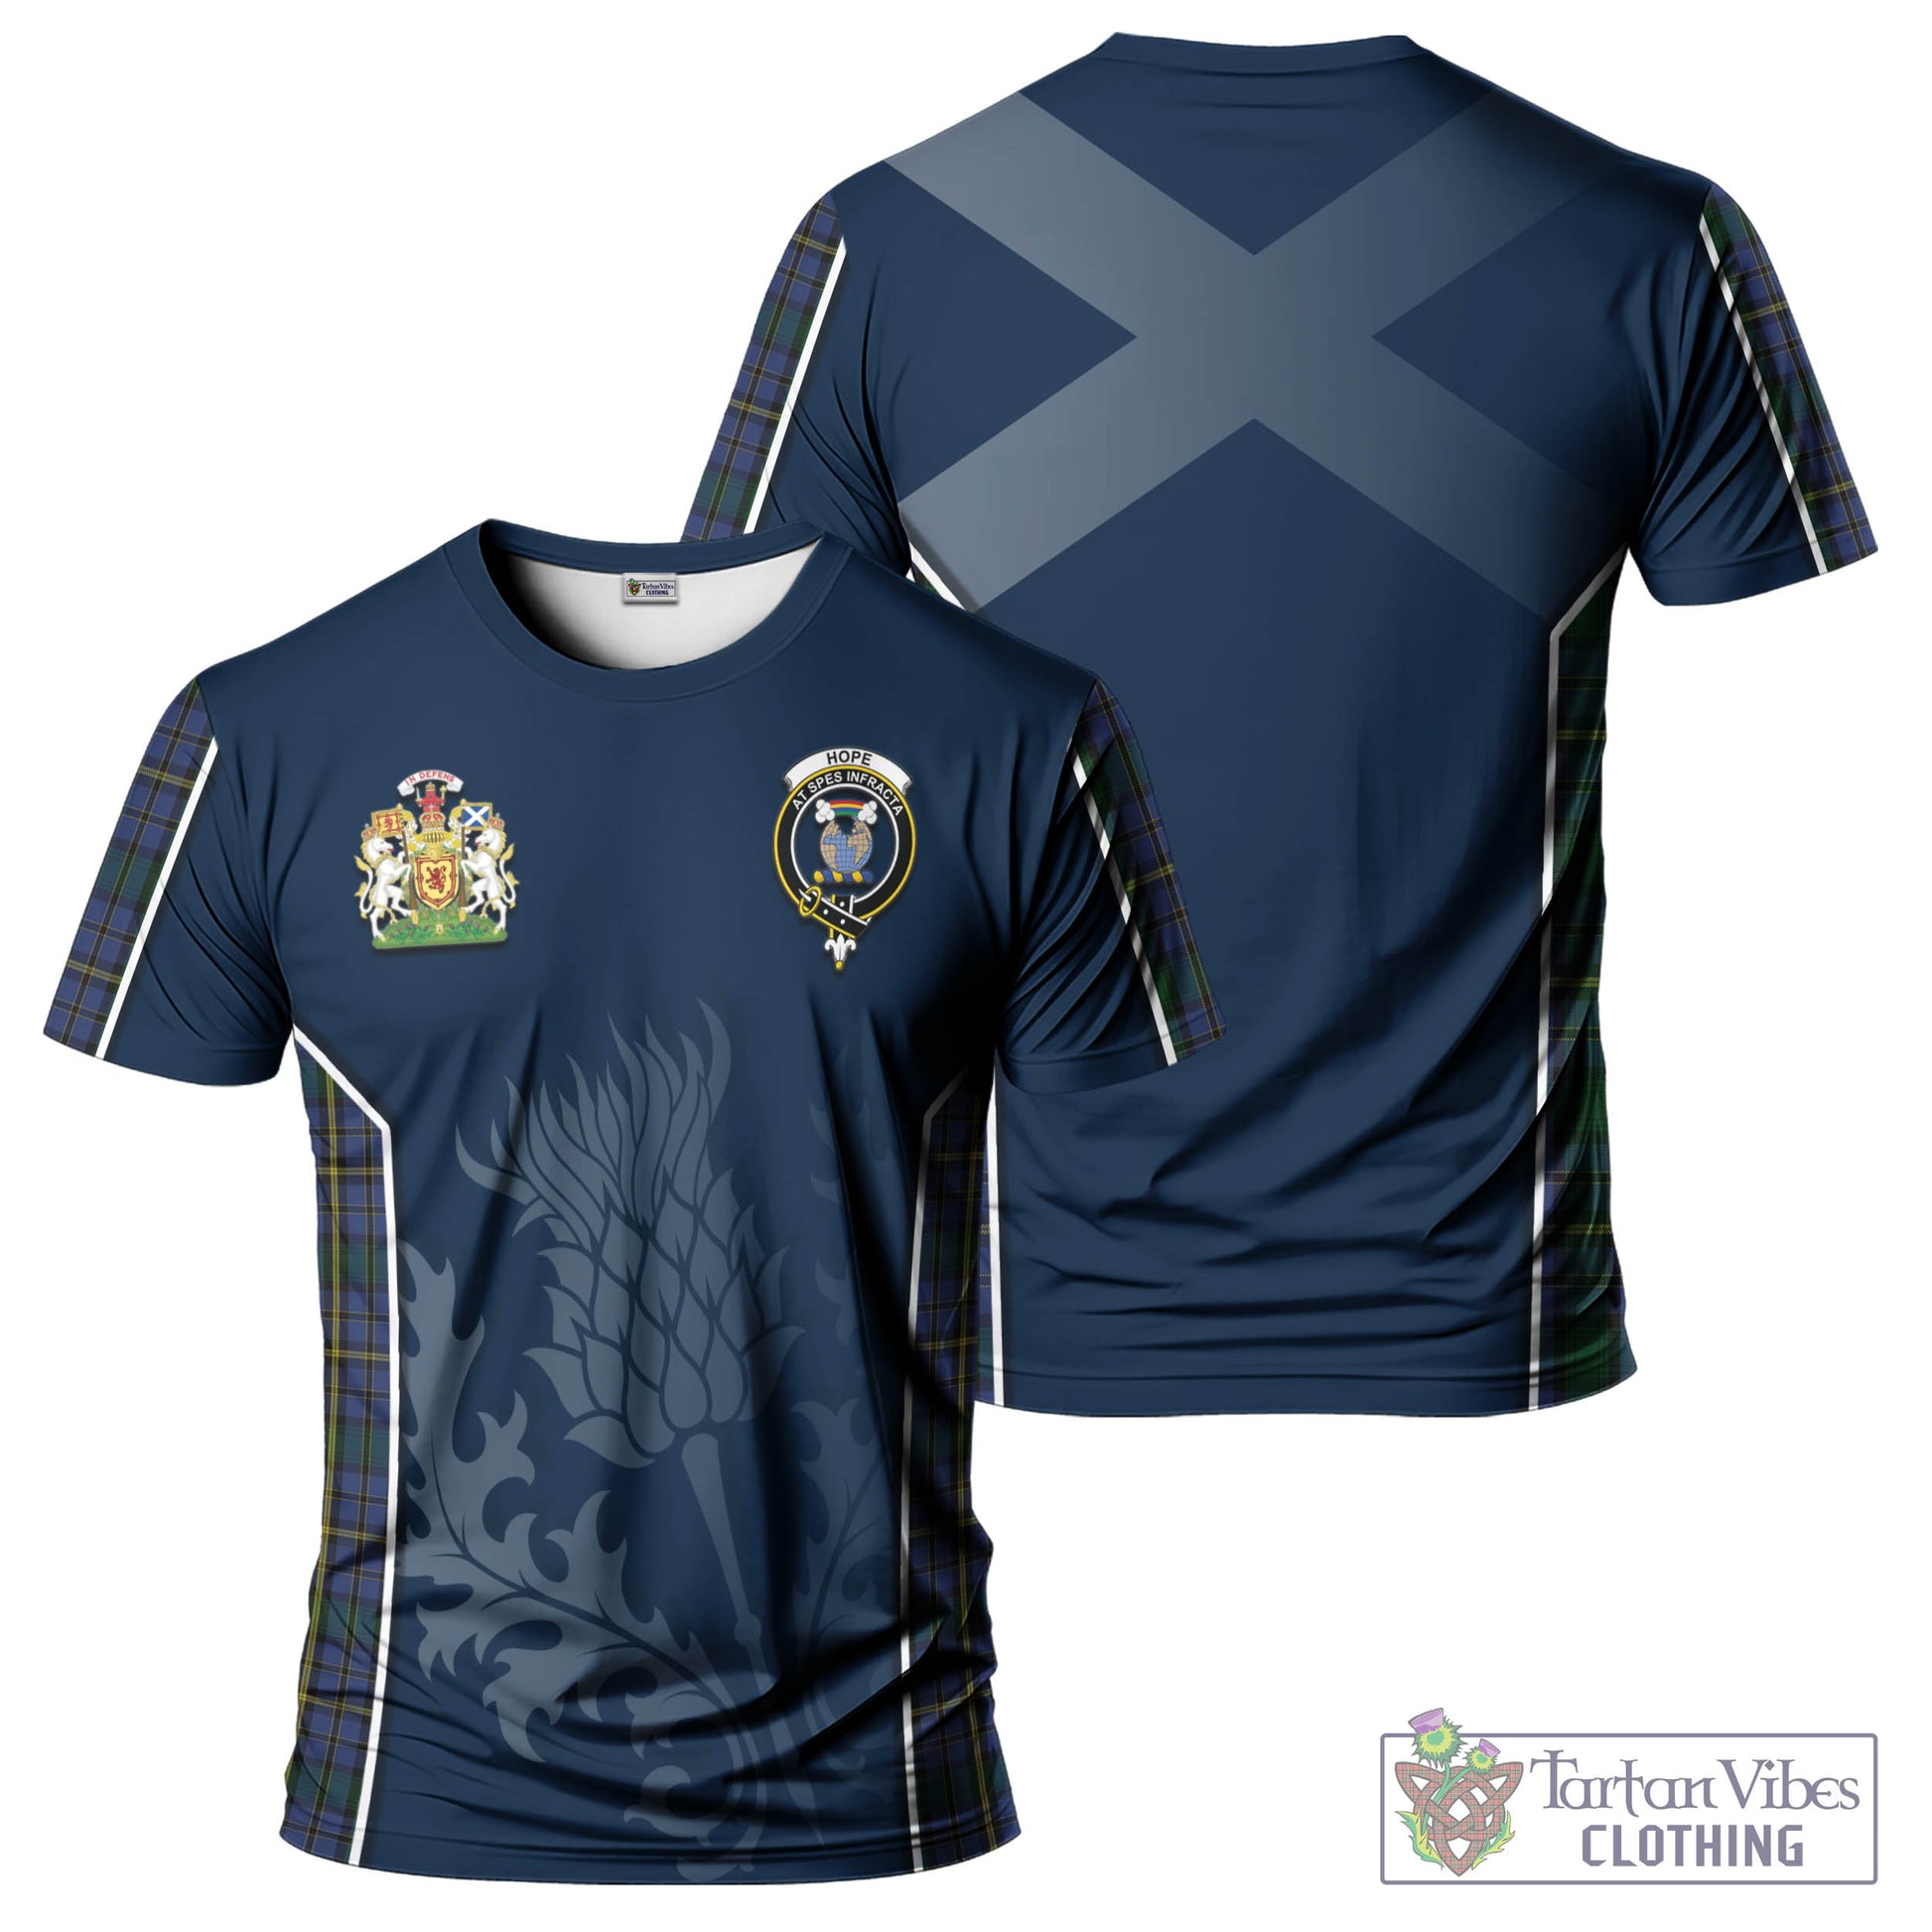 Tartan Vibes Clothing Hope Clan Originaux Tartan T-Shirt with Family Crest and Scottish Thistle Vibes Sport Style